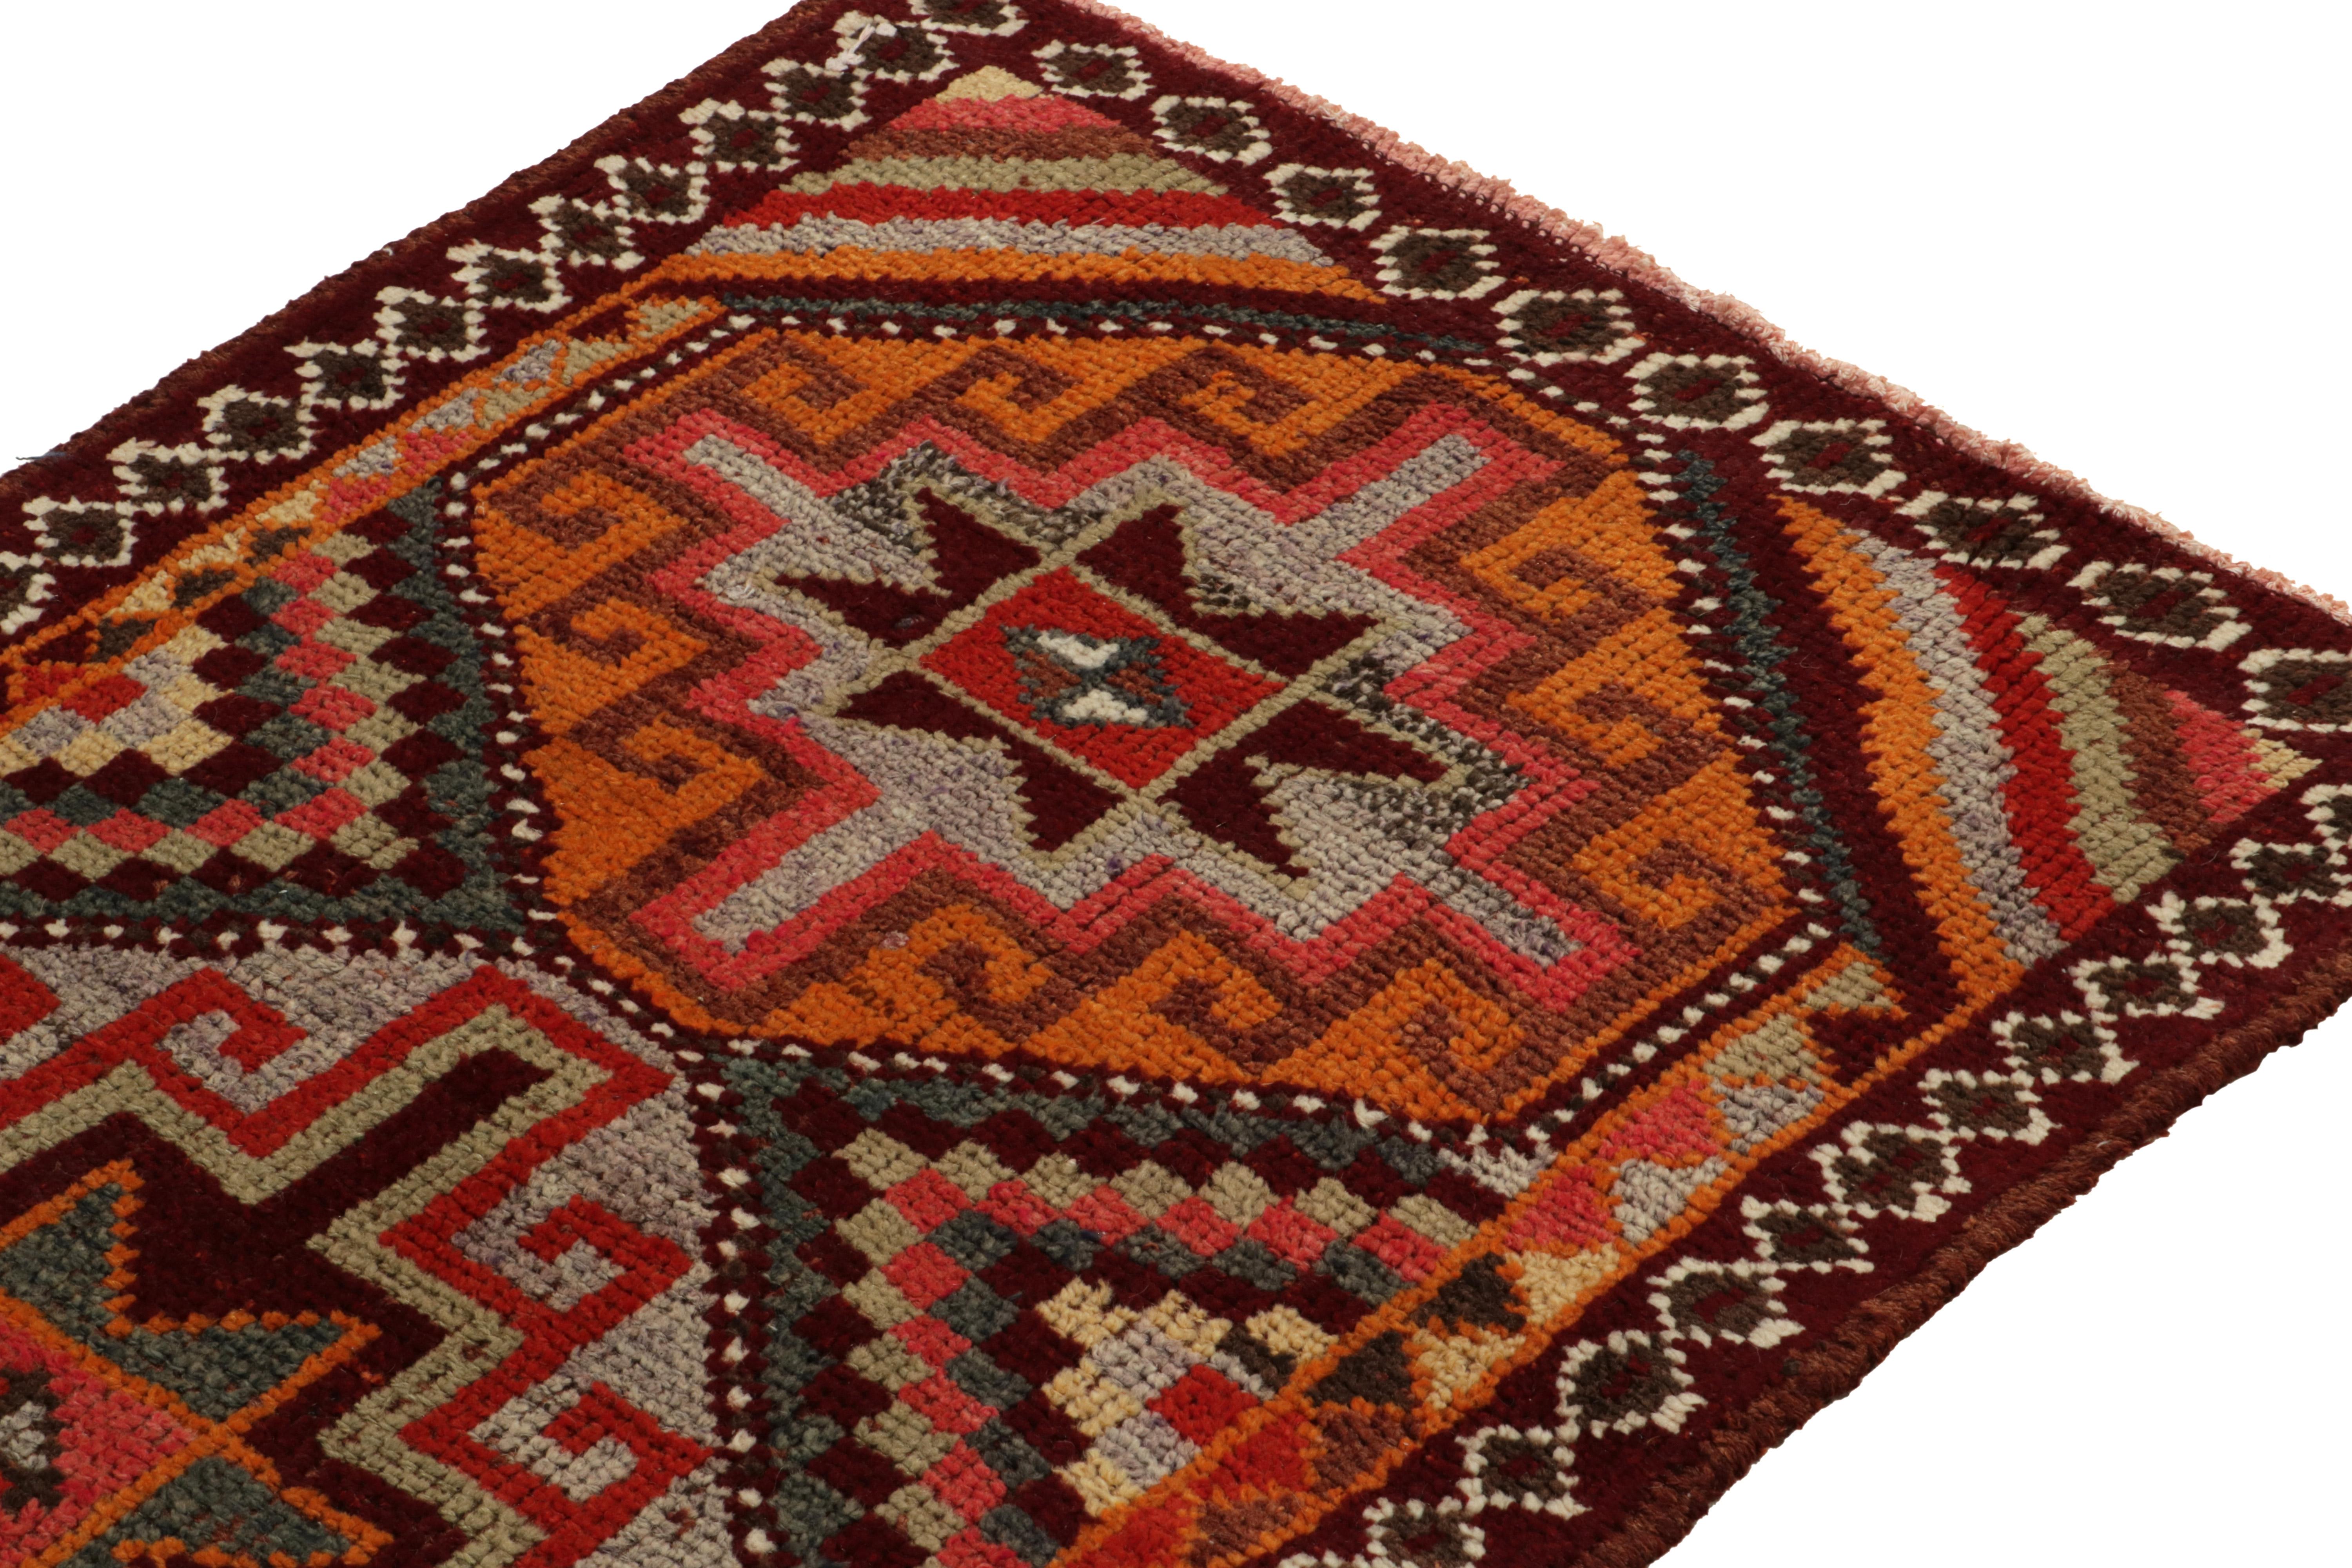 Hand-Knotted 1950s Vintage Tribal Runner in Red, Orange Geometric Patterns by Rug & Kilim For Sale